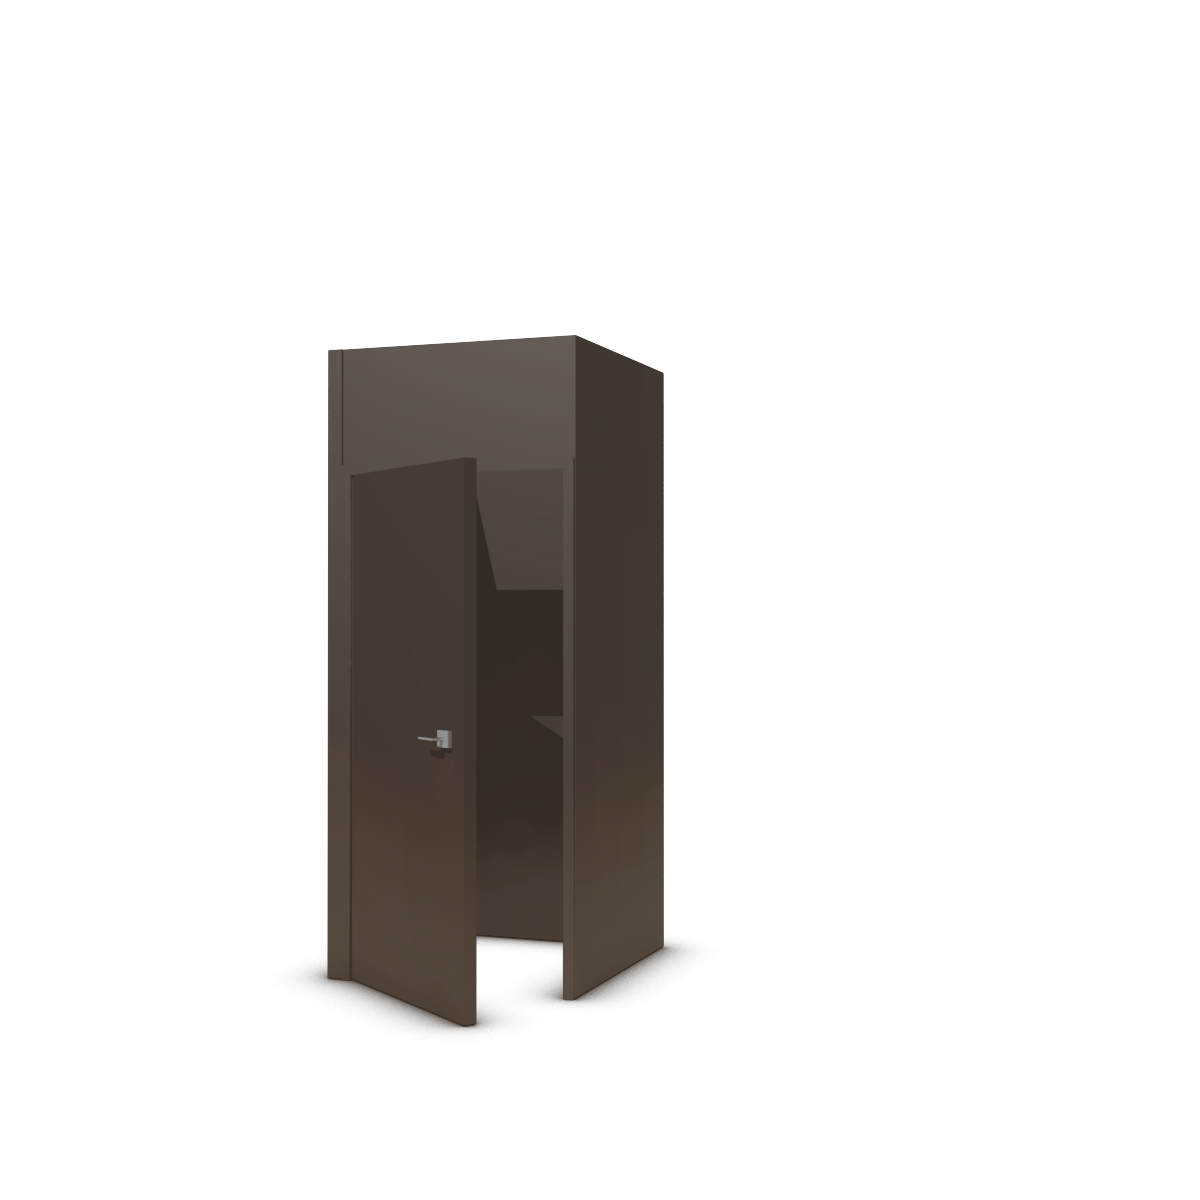 Free-standing storage cabinet in partitioning covered with solid-color textile - Chocolate